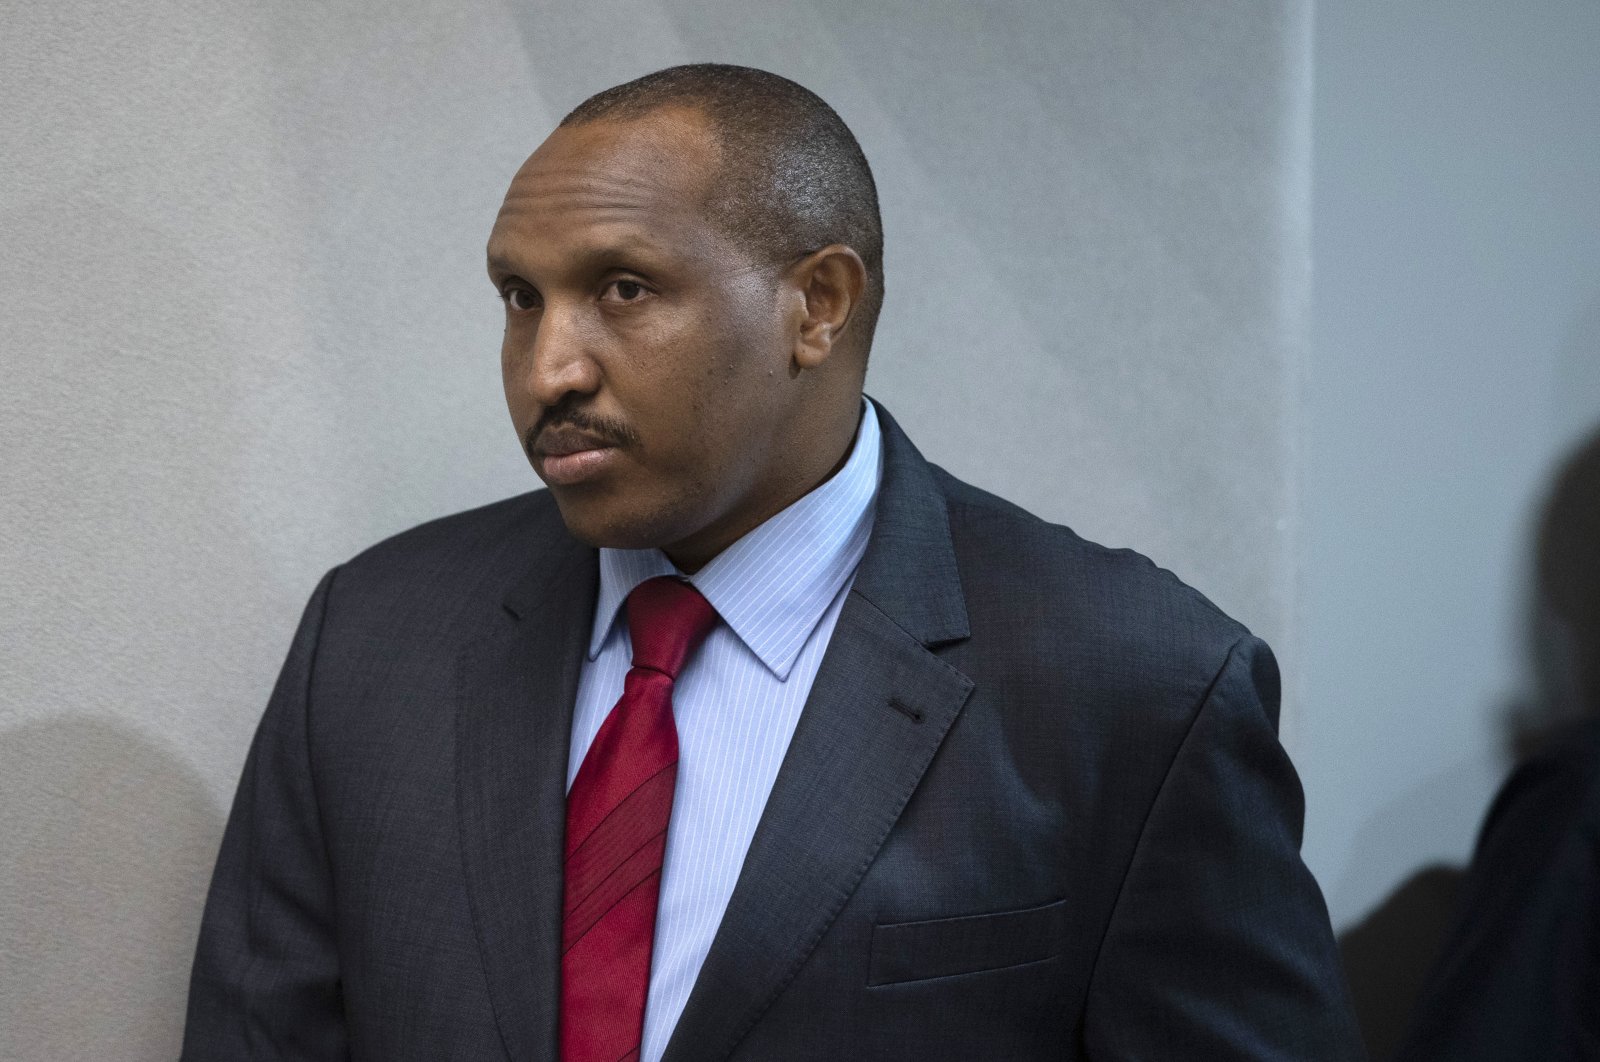 Congolese militia commander Bosco Ntaganda enters the courtroom of the International Criminal Court, or ICC, to hear the sentence in his trial in The Hague, Netherlands, Nov. 7, 2019. (AP Photo)